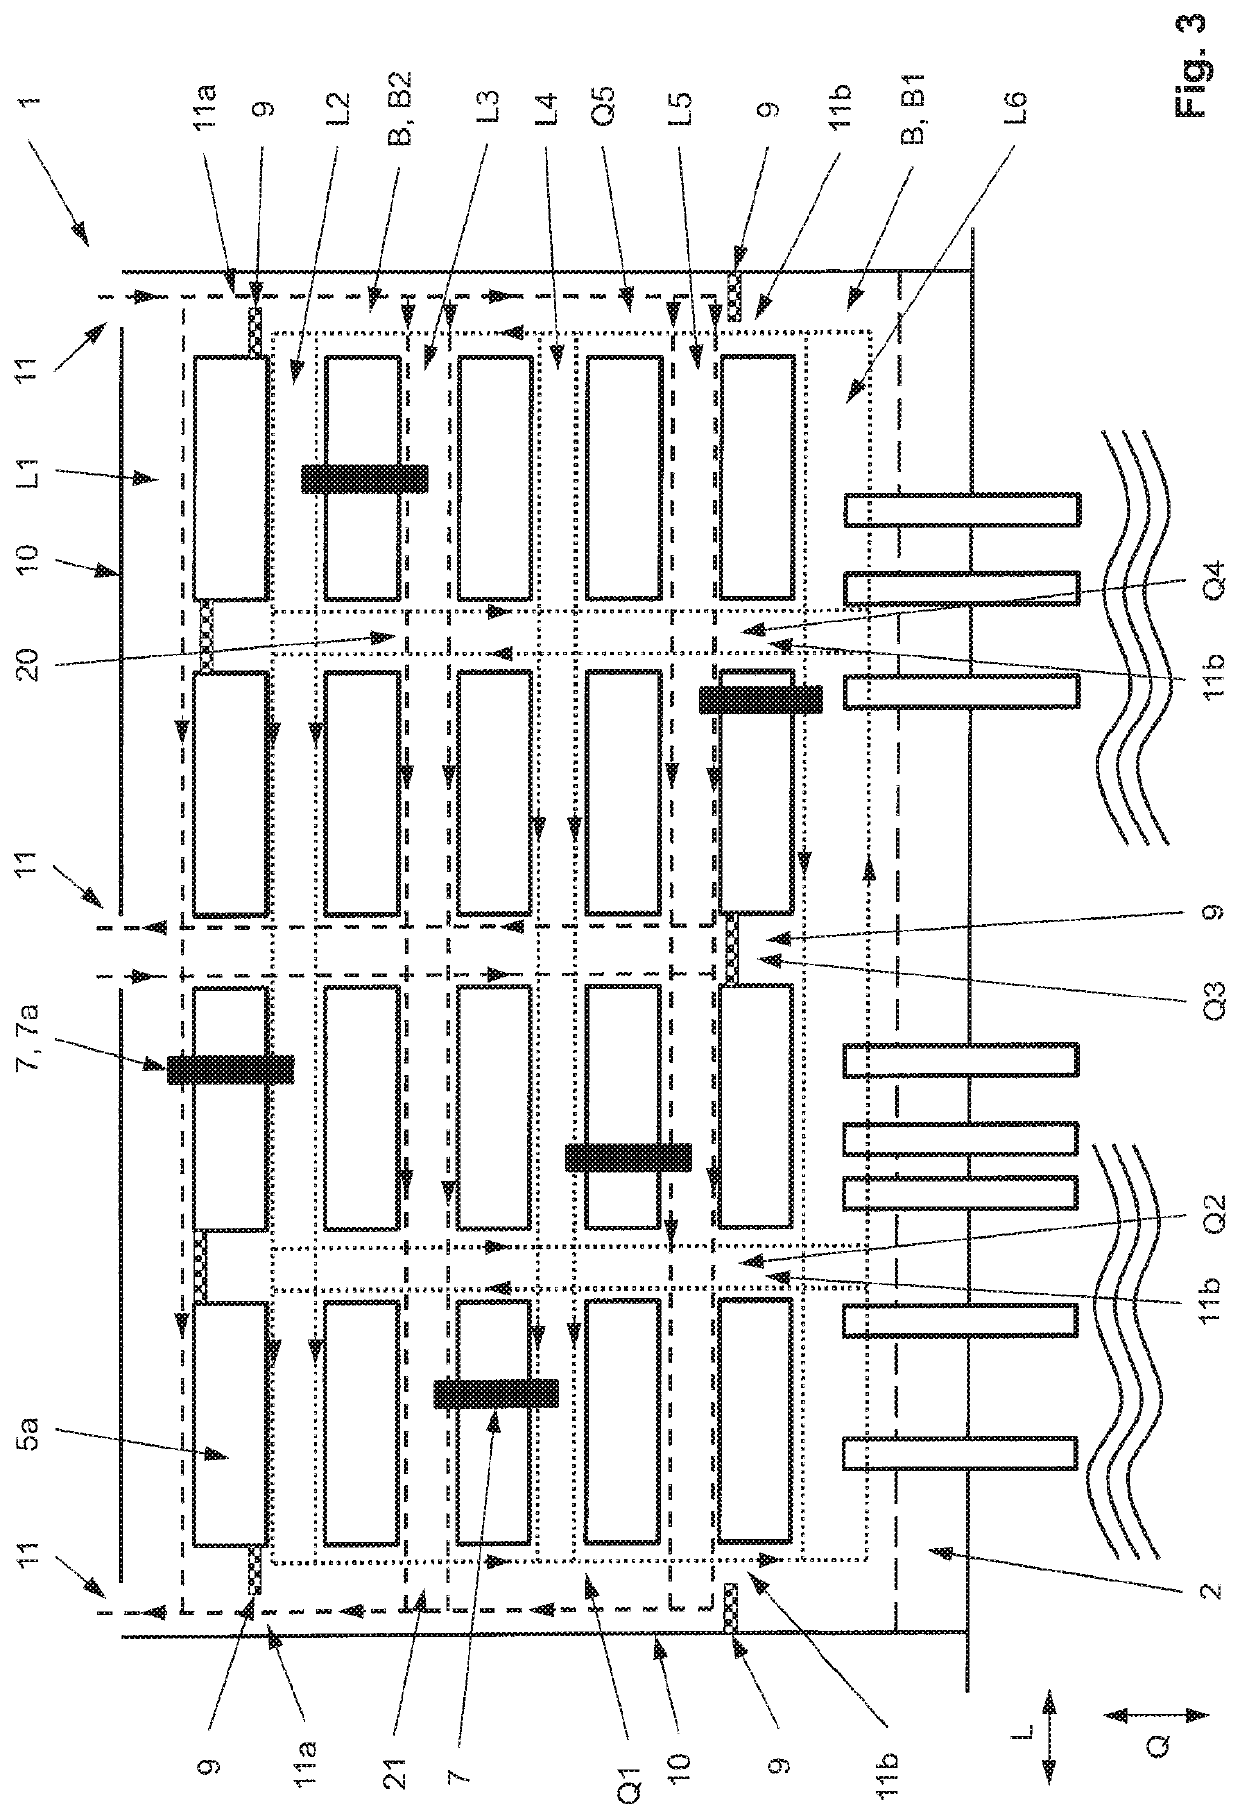 System for transporting containers, particularly iso containers, using heavy goods vehicles